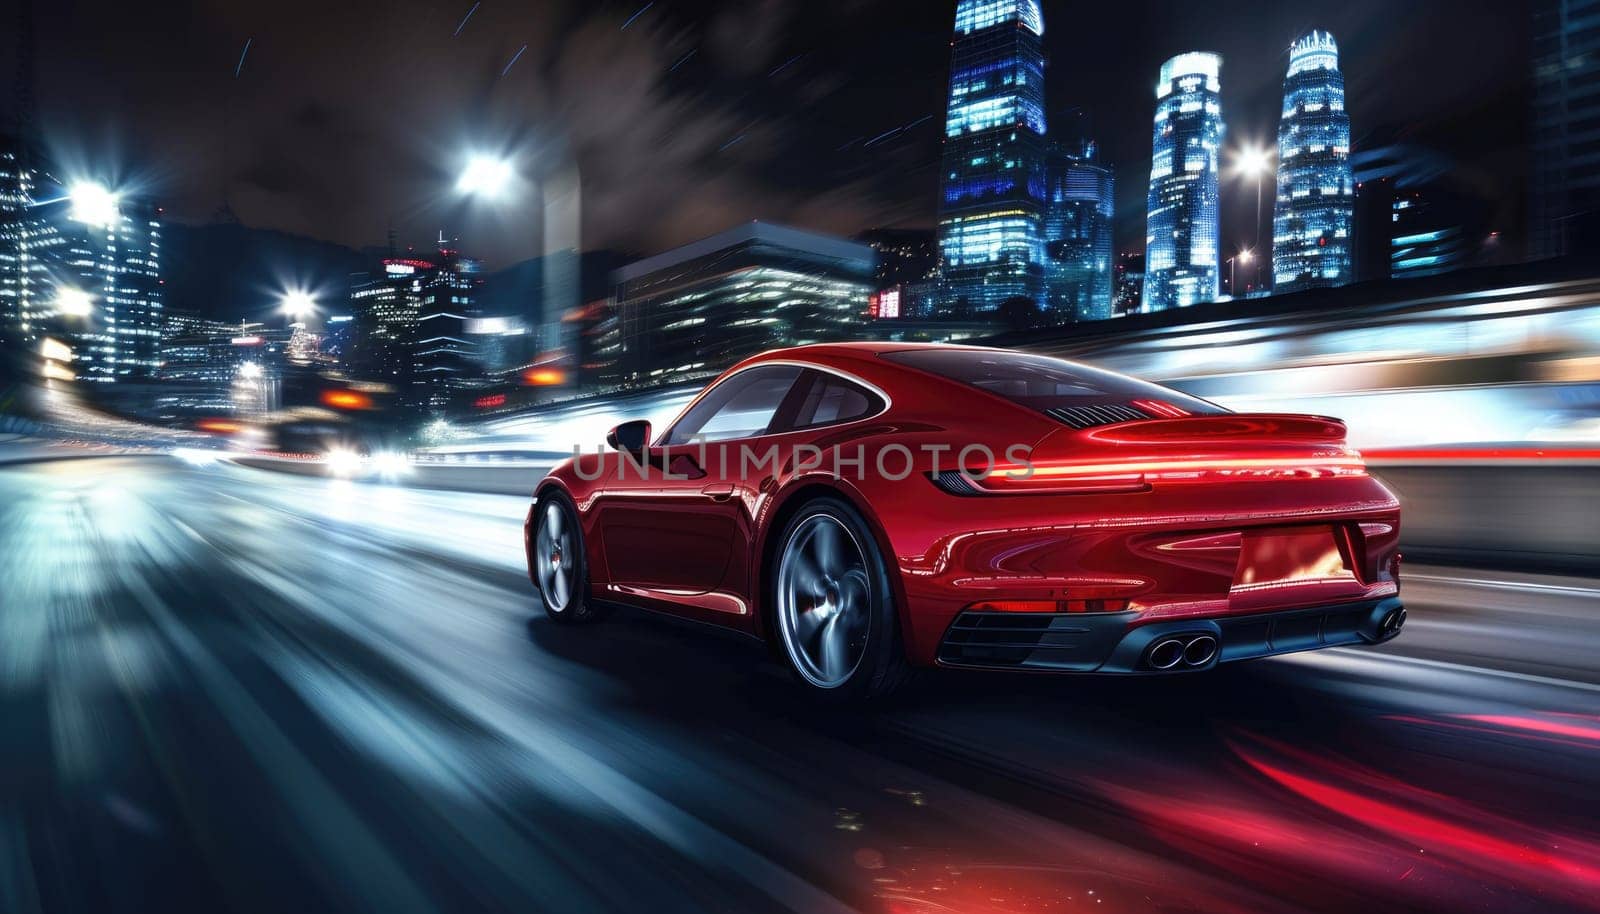 A red sports car is speeding down a city street at night by AI generated image.